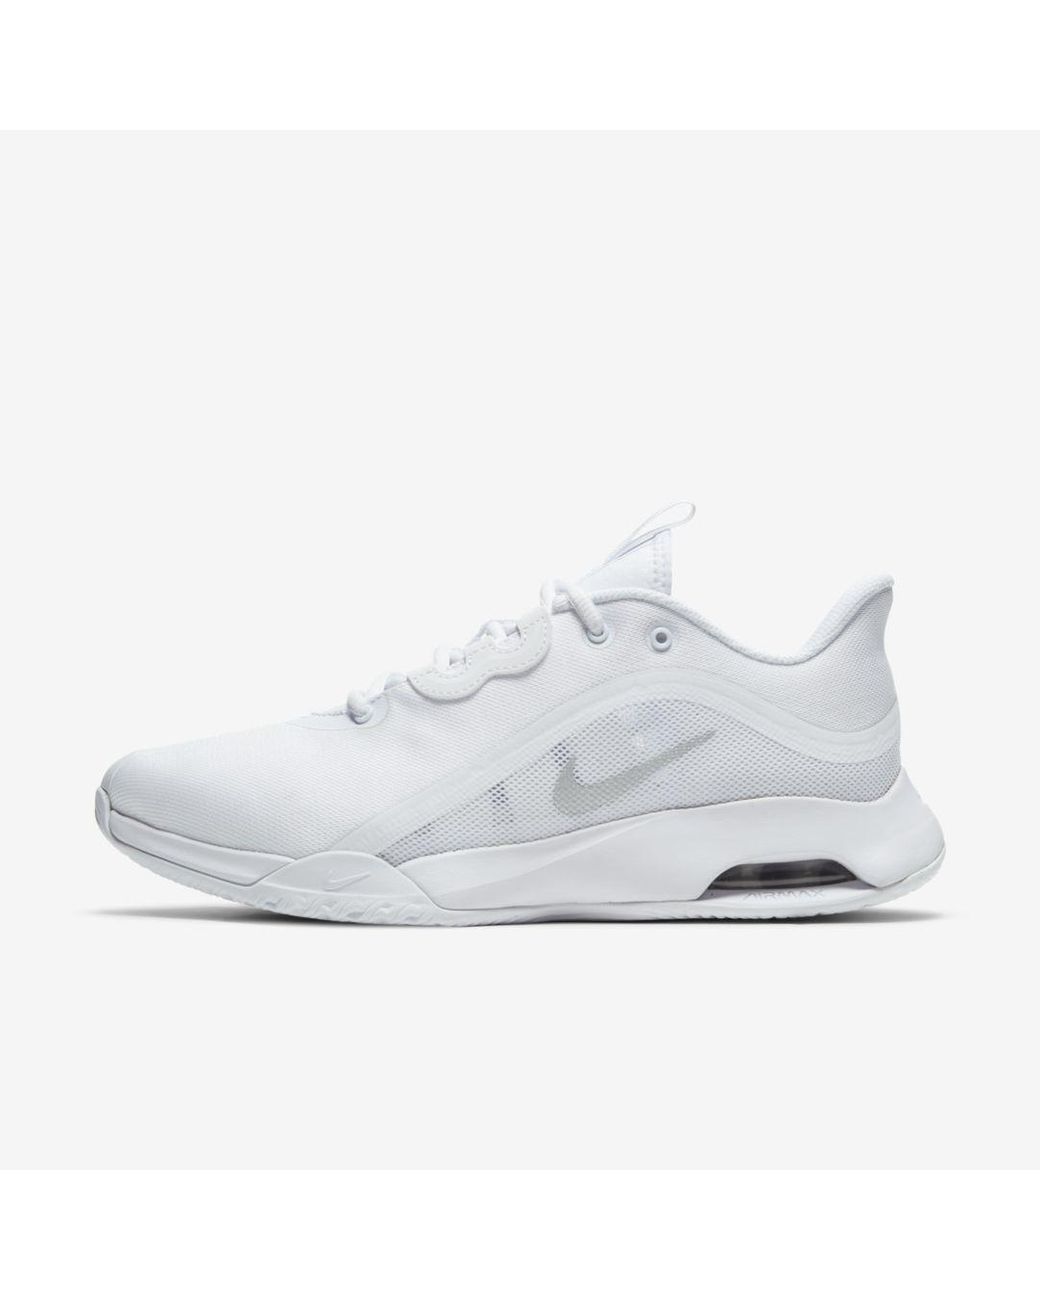 Nike Court Air Max Volley Hard Court Tennis Shoe in White | Lyst